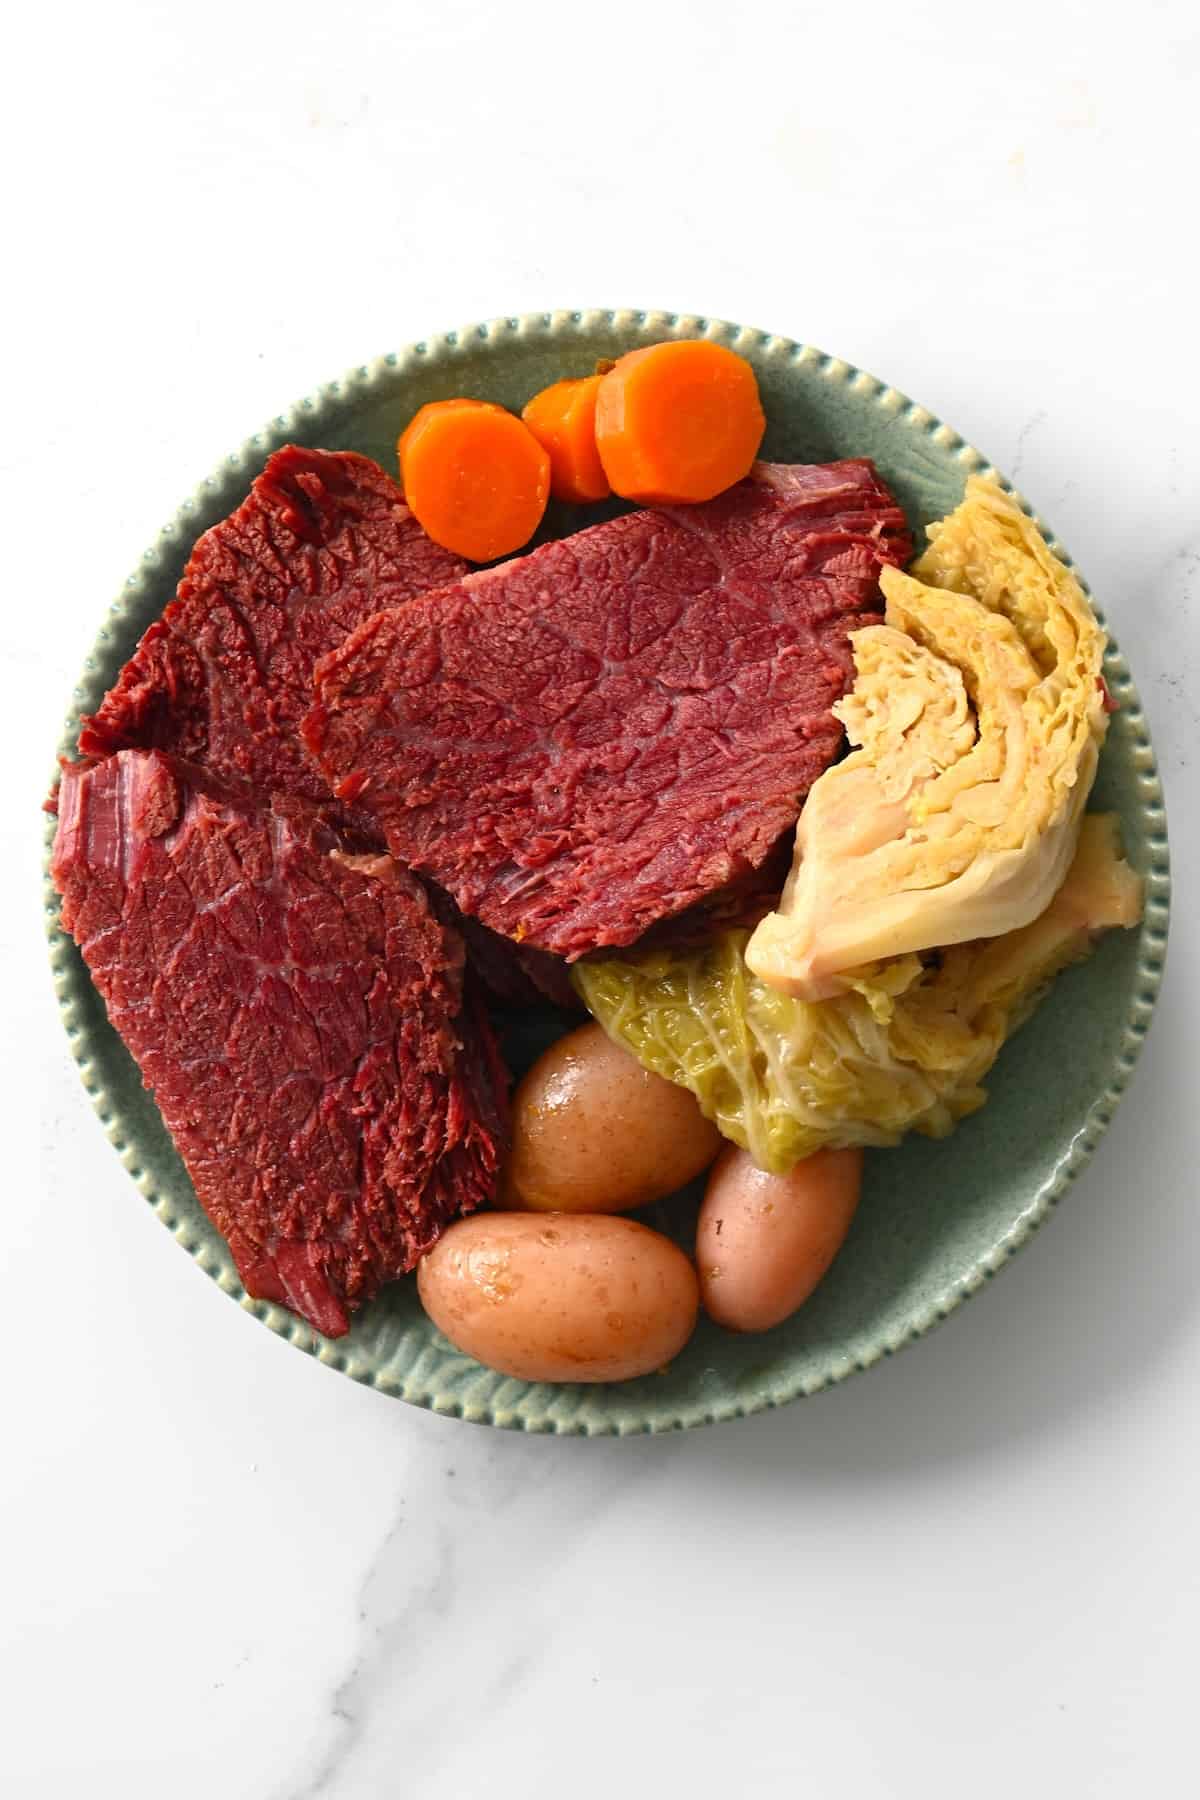 Corned beef and cabbage serve on a plate